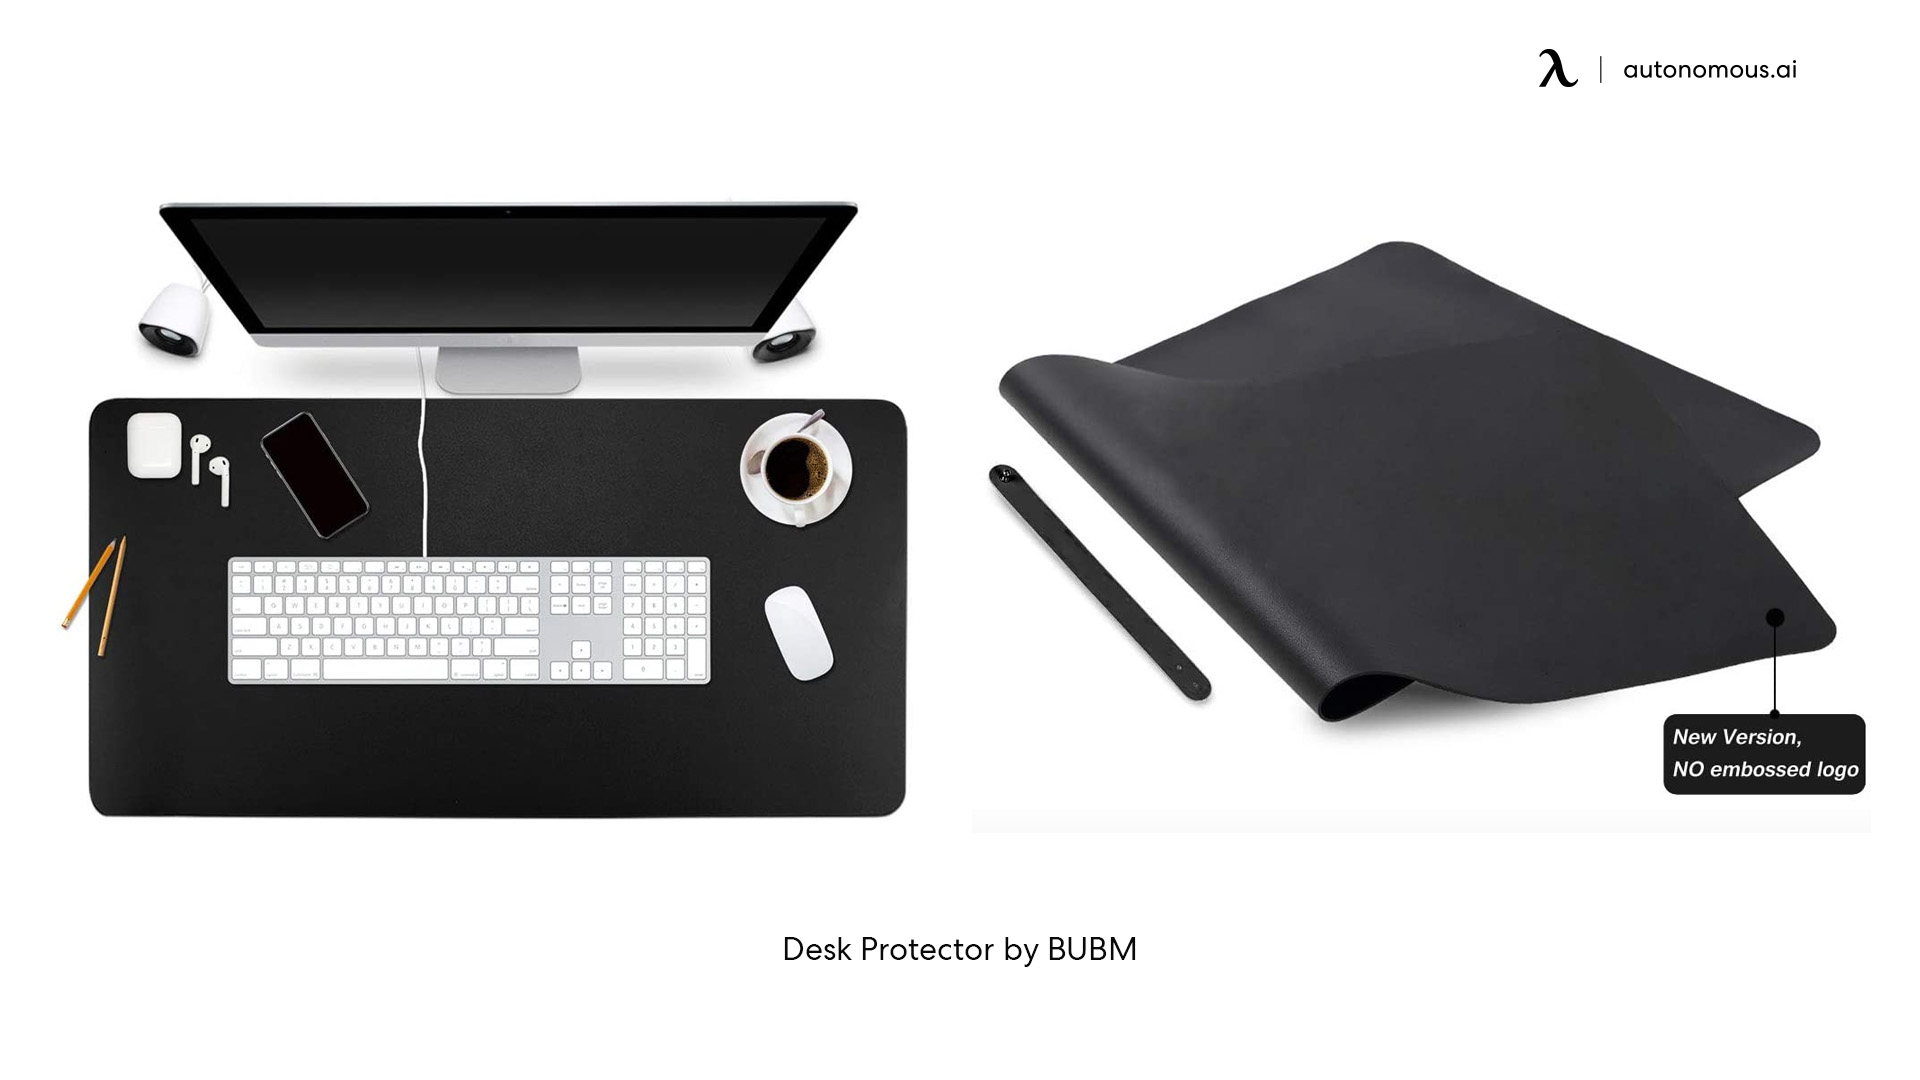 Desk Protector by BUBM